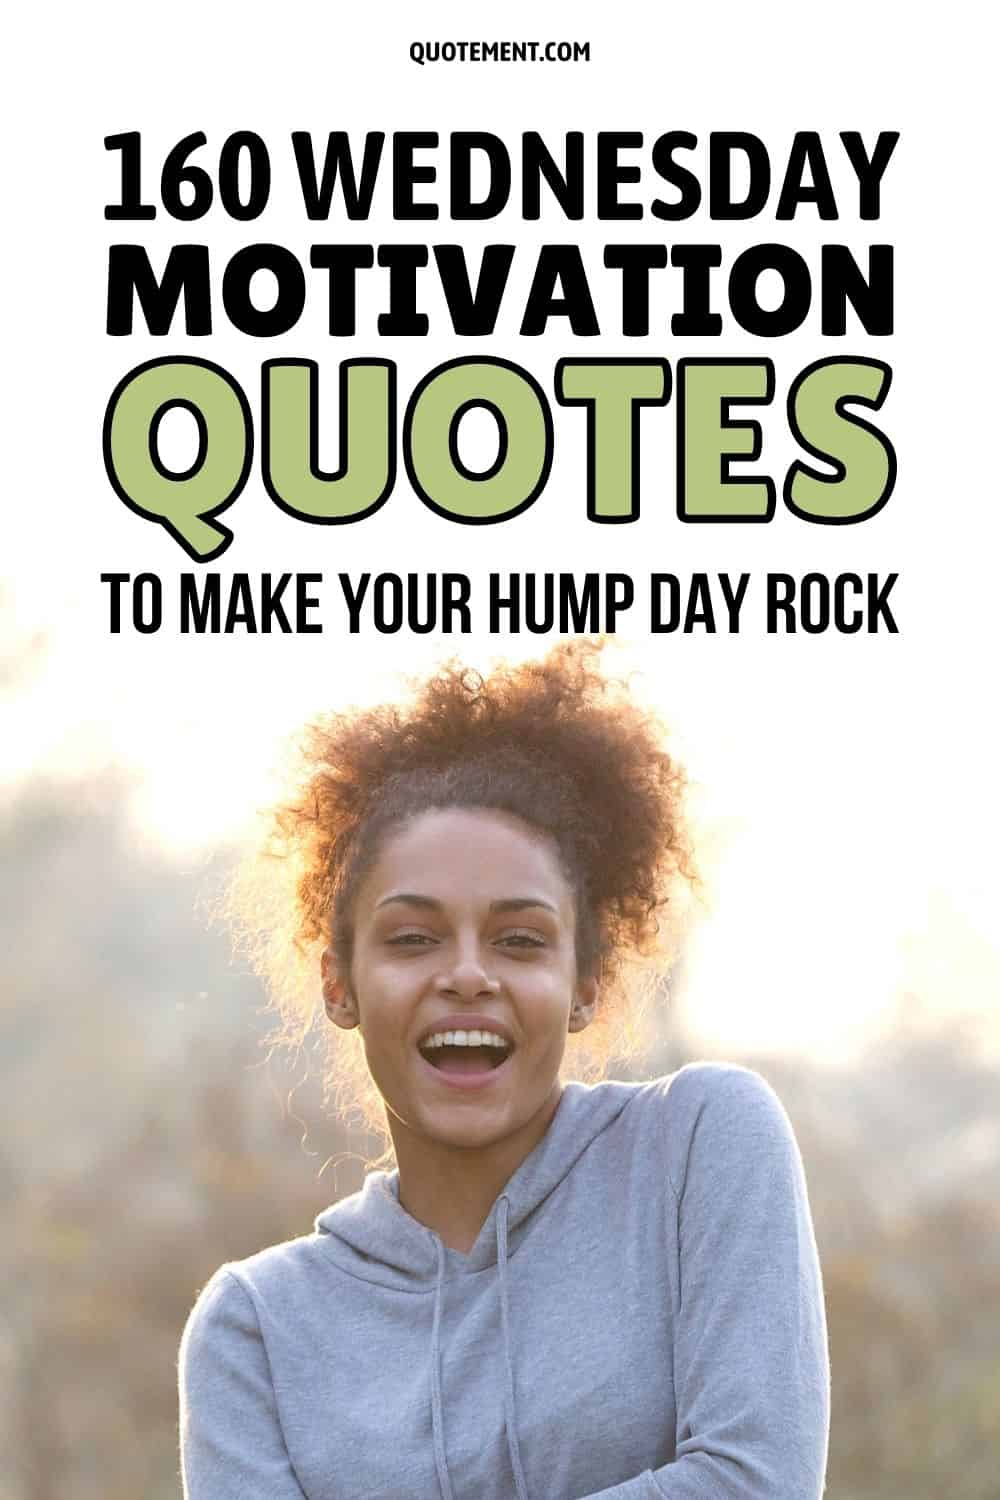 160 Wednesday Motivation Quotes To Make Your Hump Day Rock